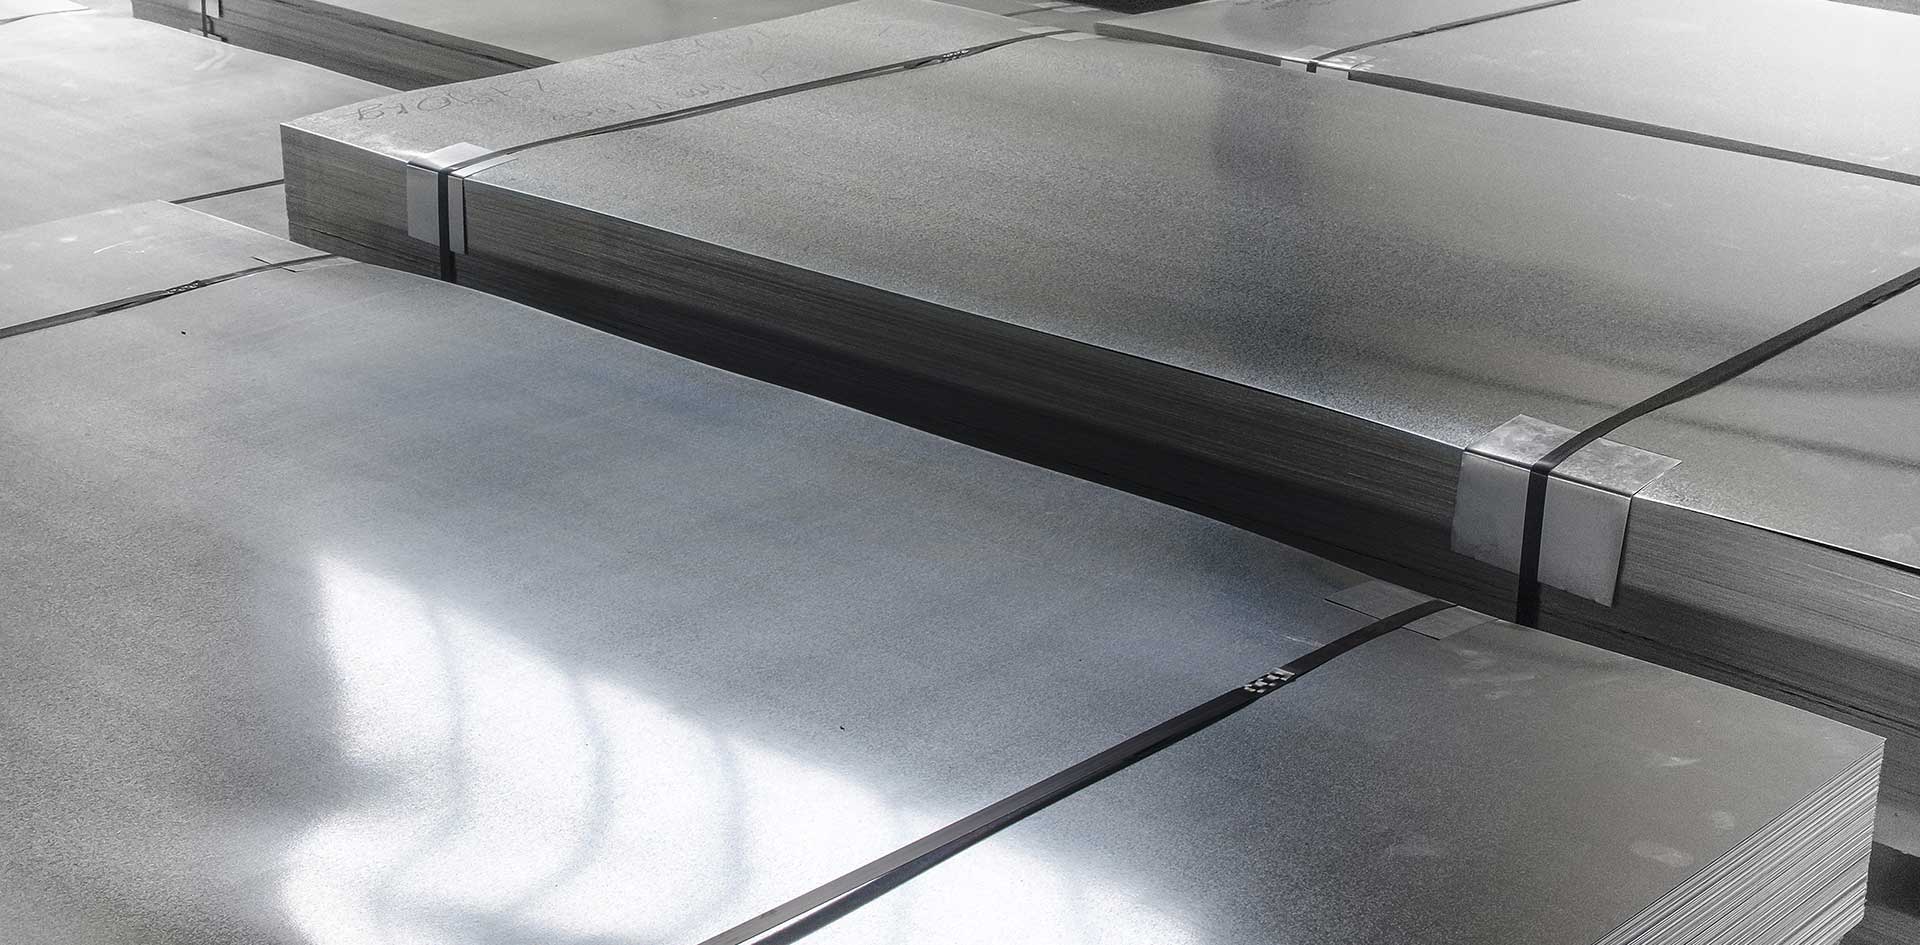 We are one of the most professional suppliers for steel materials